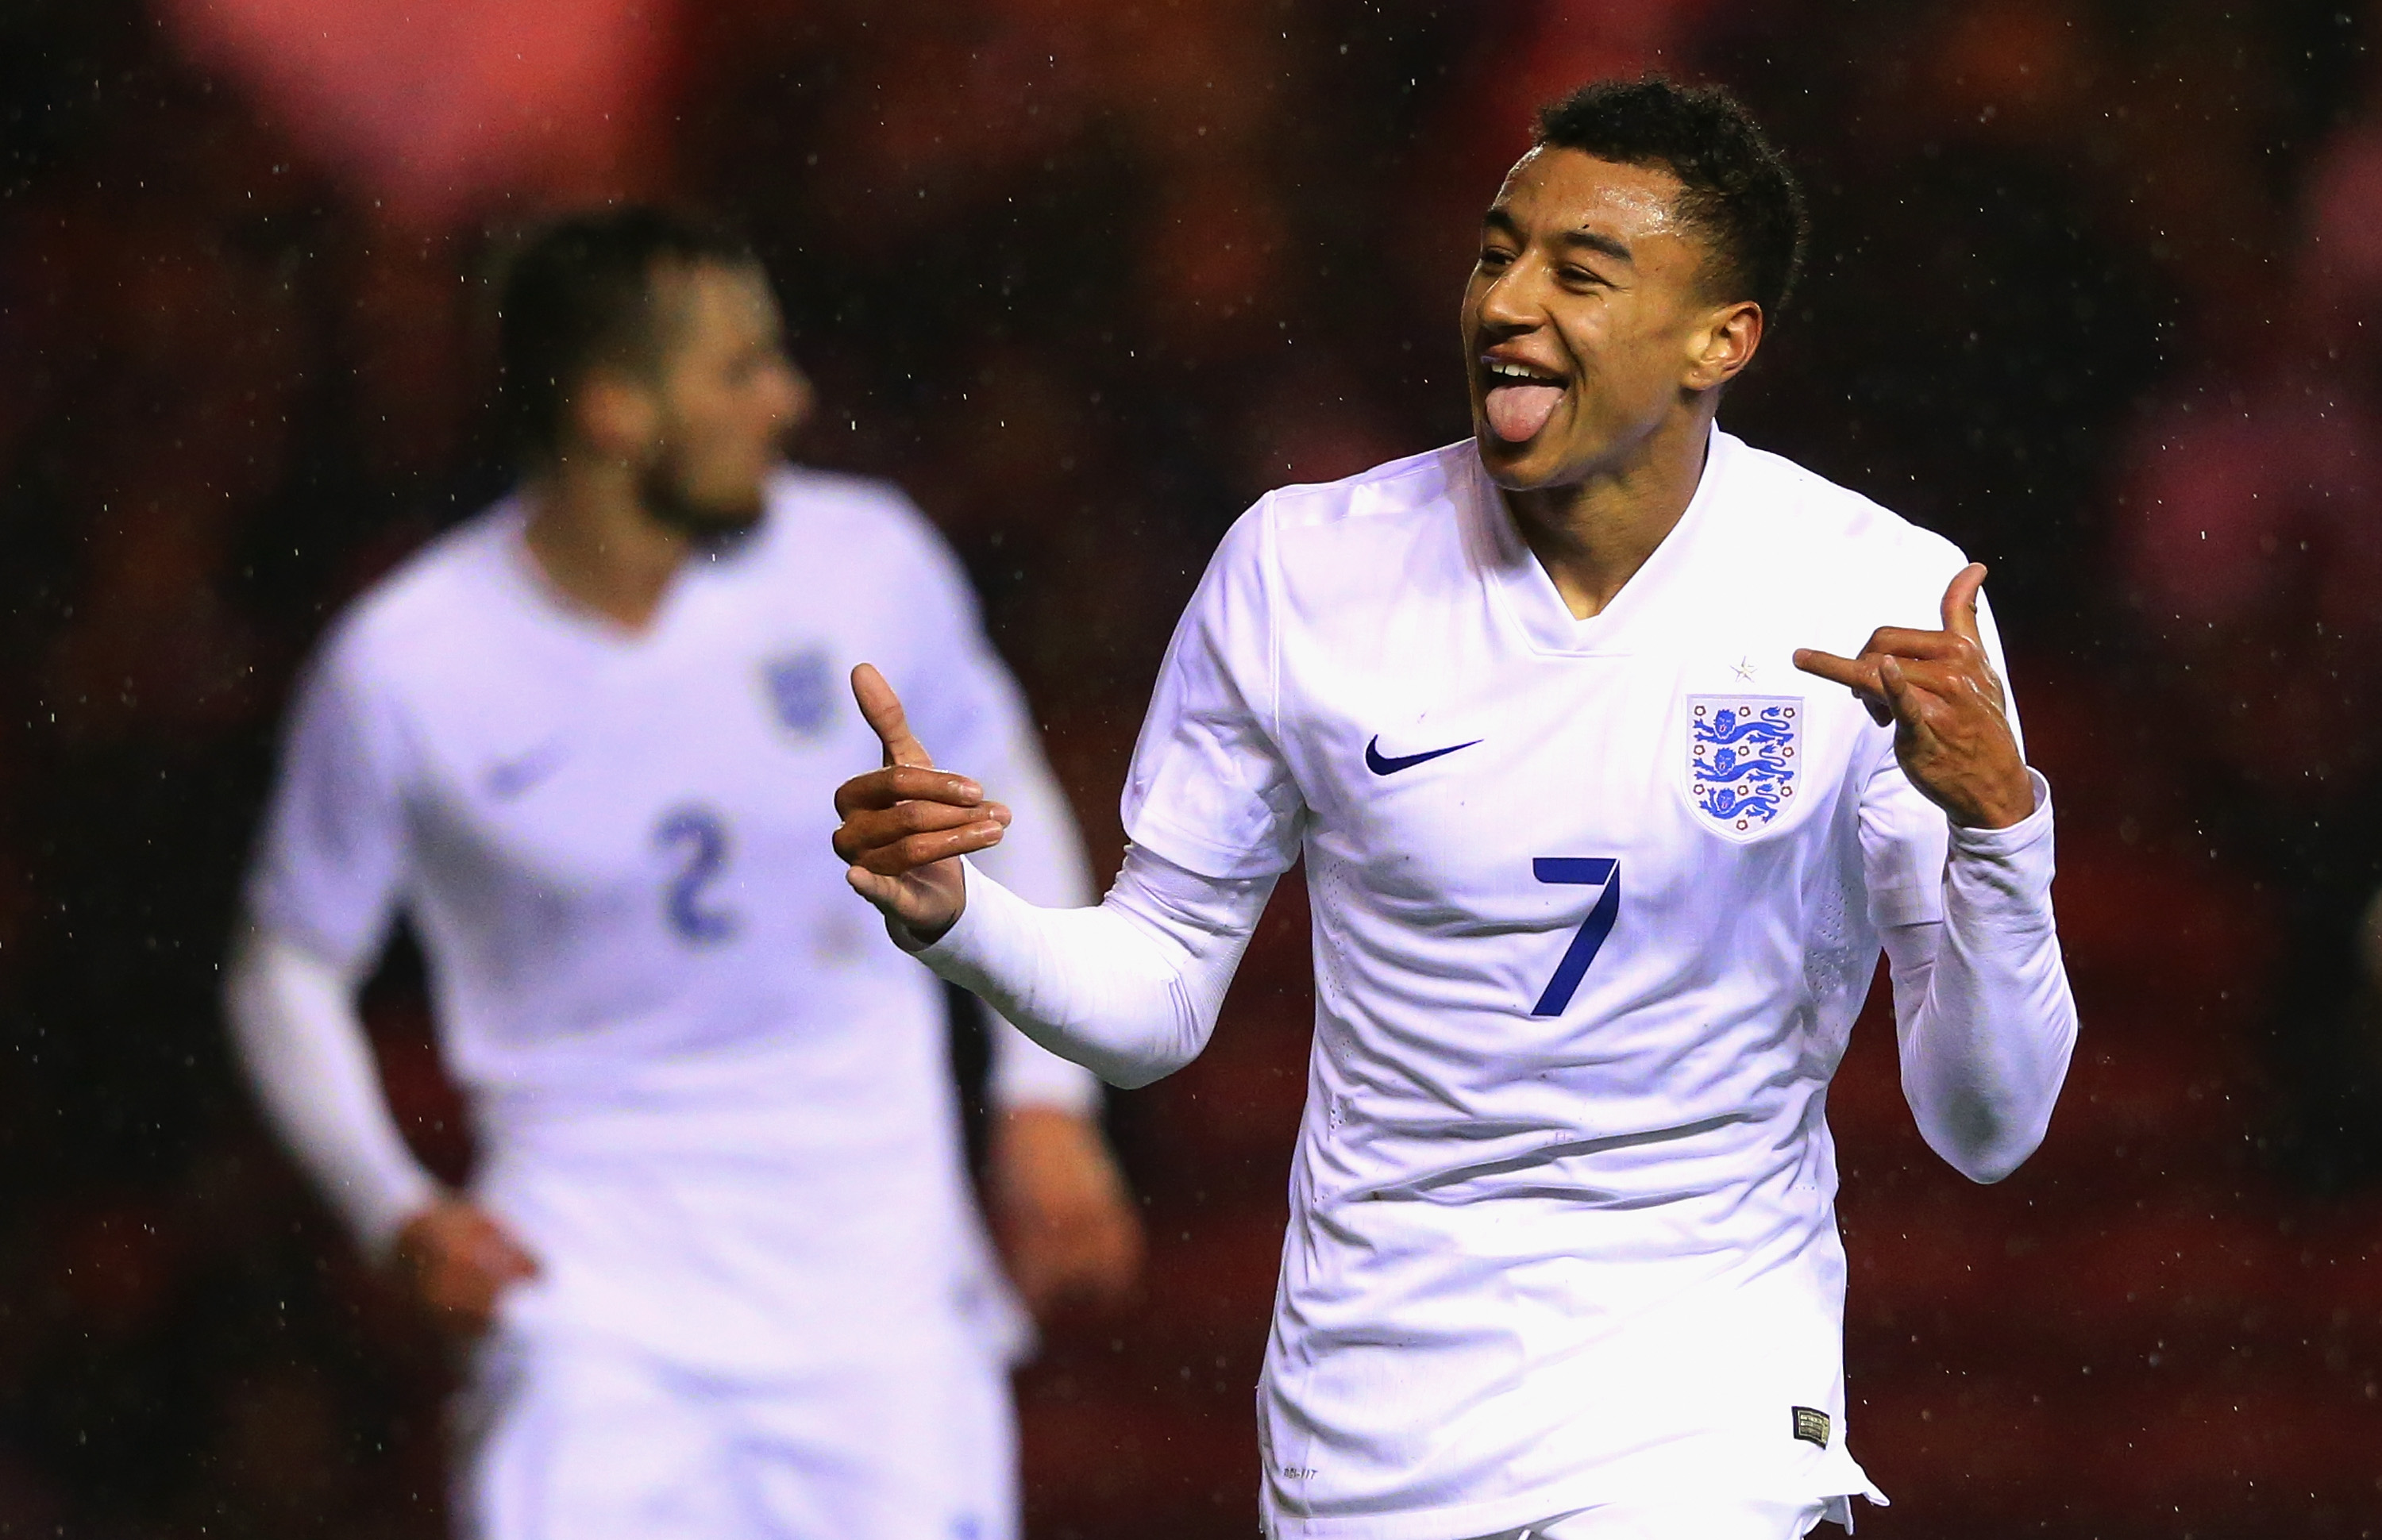 MIDDLESBROUGH, ENGLAND - MARCH 30: Jesse Lingard of England celebrates after scoring their first goal during the international friendly between England Under 21 and Germany Under 21 at Riverside Stadium on March 30, 2015 in Middlesbrough, England. (Photo by Alex Livesey/Getty Images)